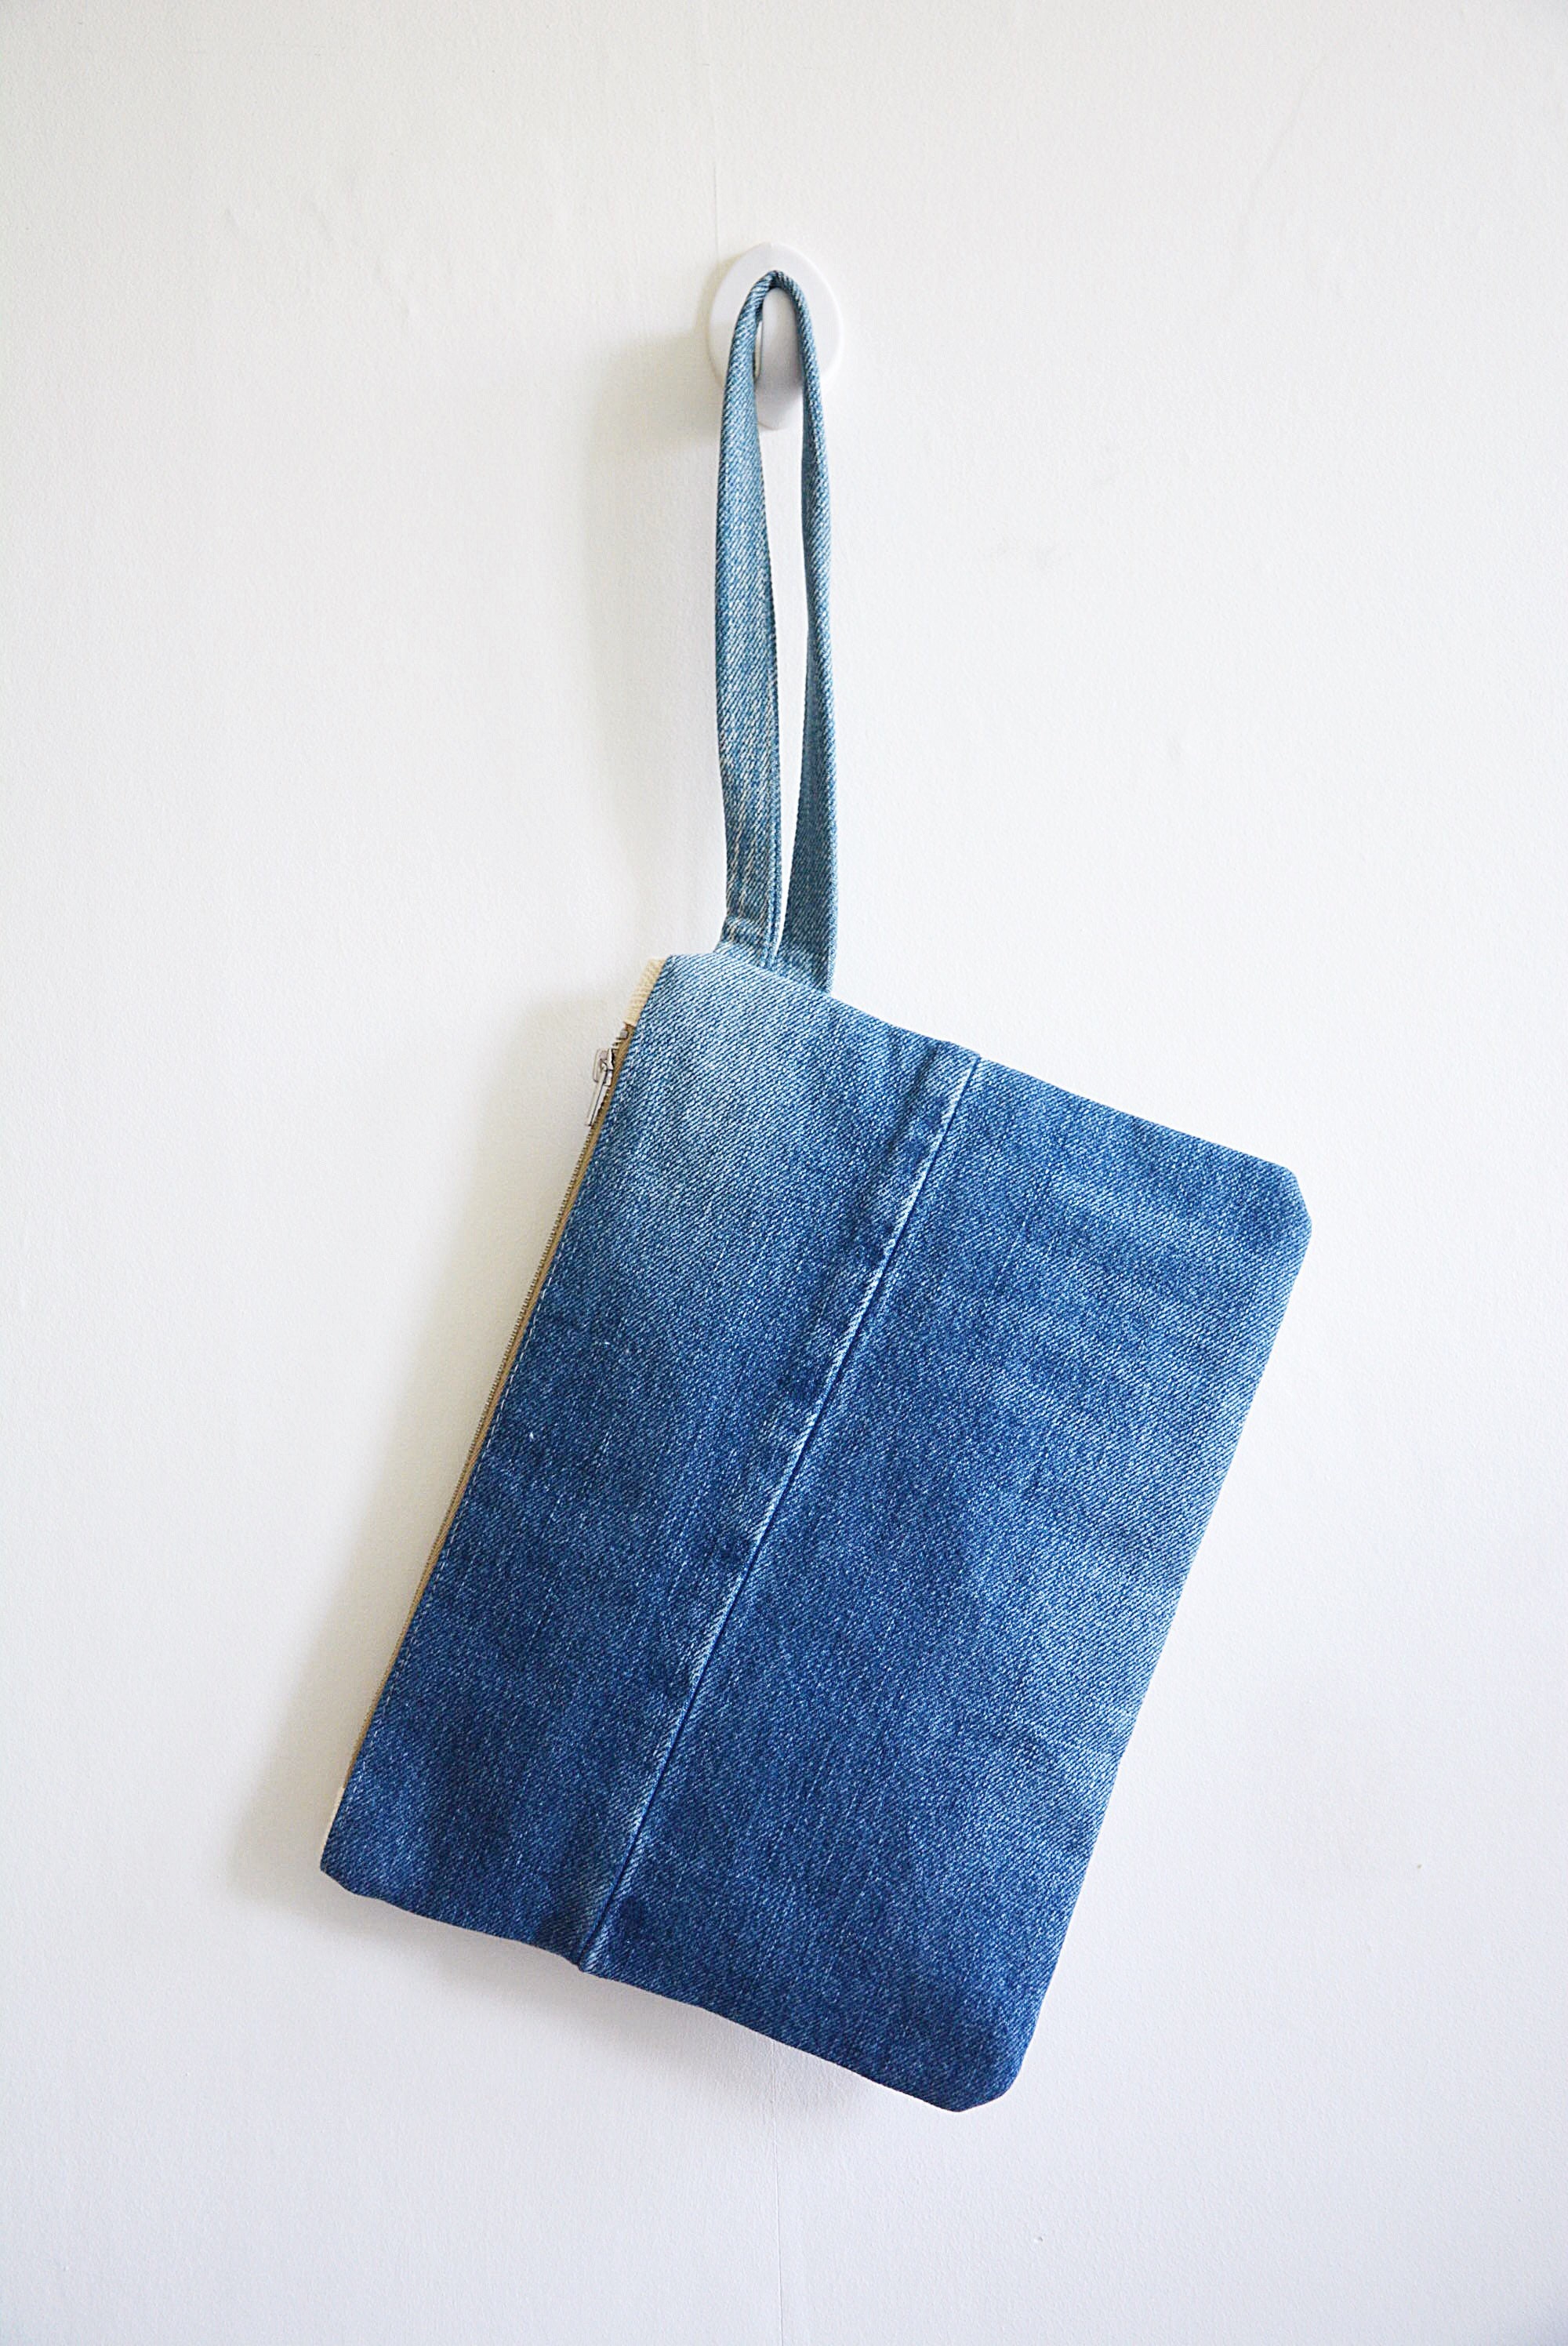 DENIM Wristlet With Lace and Cotton Lining // Stylish Design ...